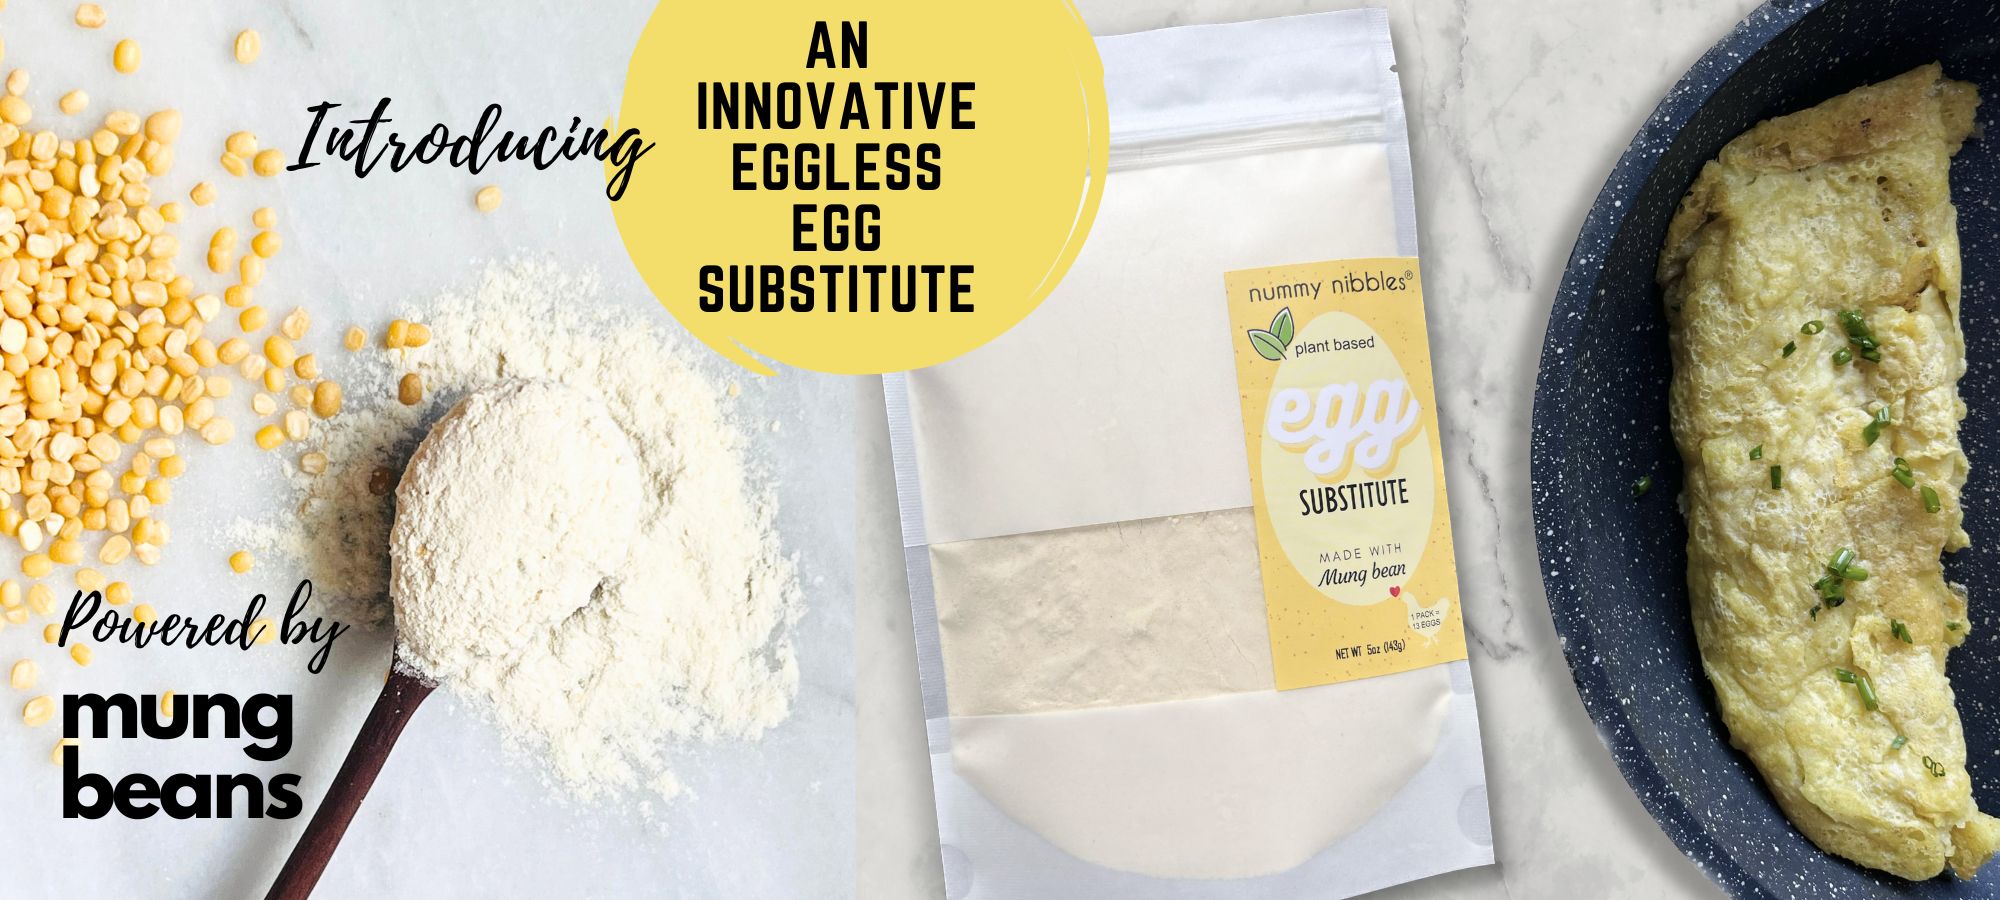 Pouch of Mung Bean Based Vegan Egg Substitute Powder showing delicious omelet image made using this productwith caption Powered by Mung Beans